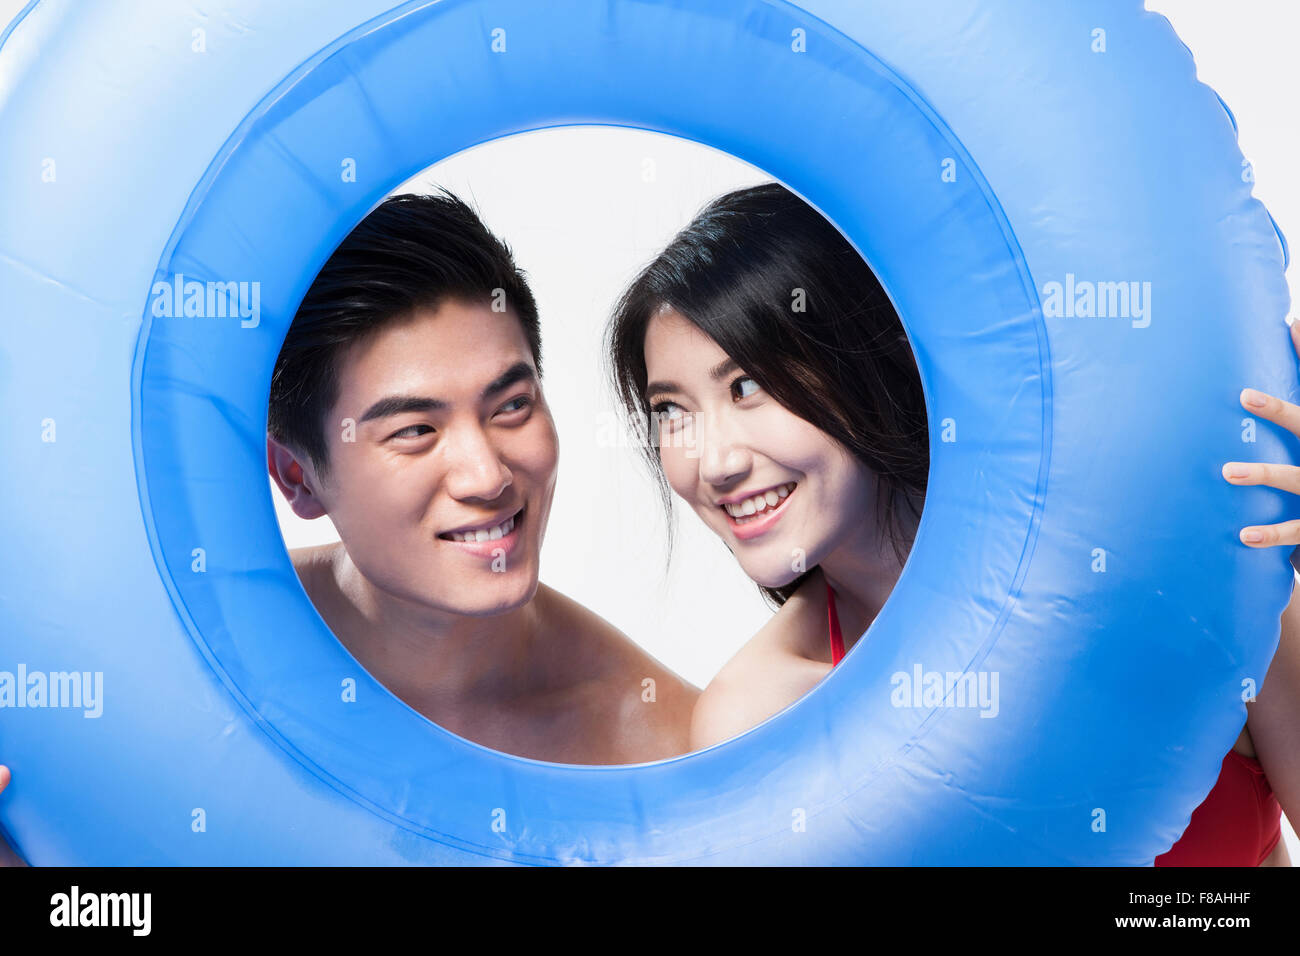 Couple looking through the hole of inner tube and staring each other Stock Photo